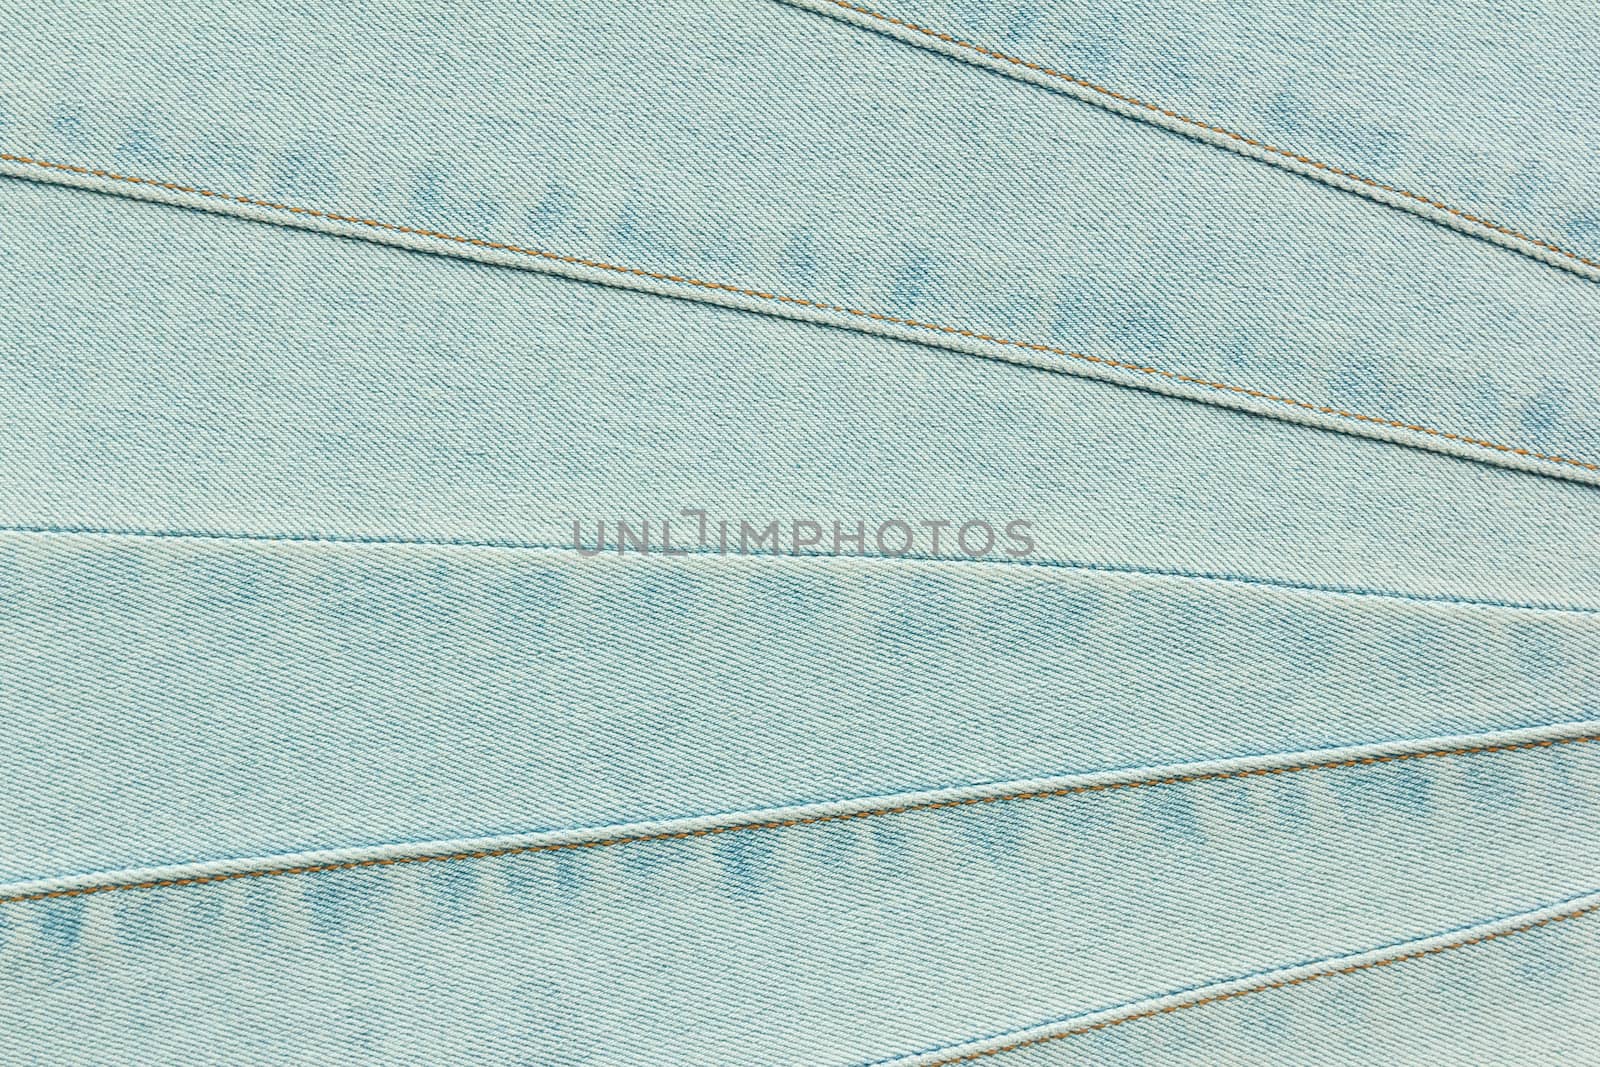 Blue Jeans with Seams Texture Background